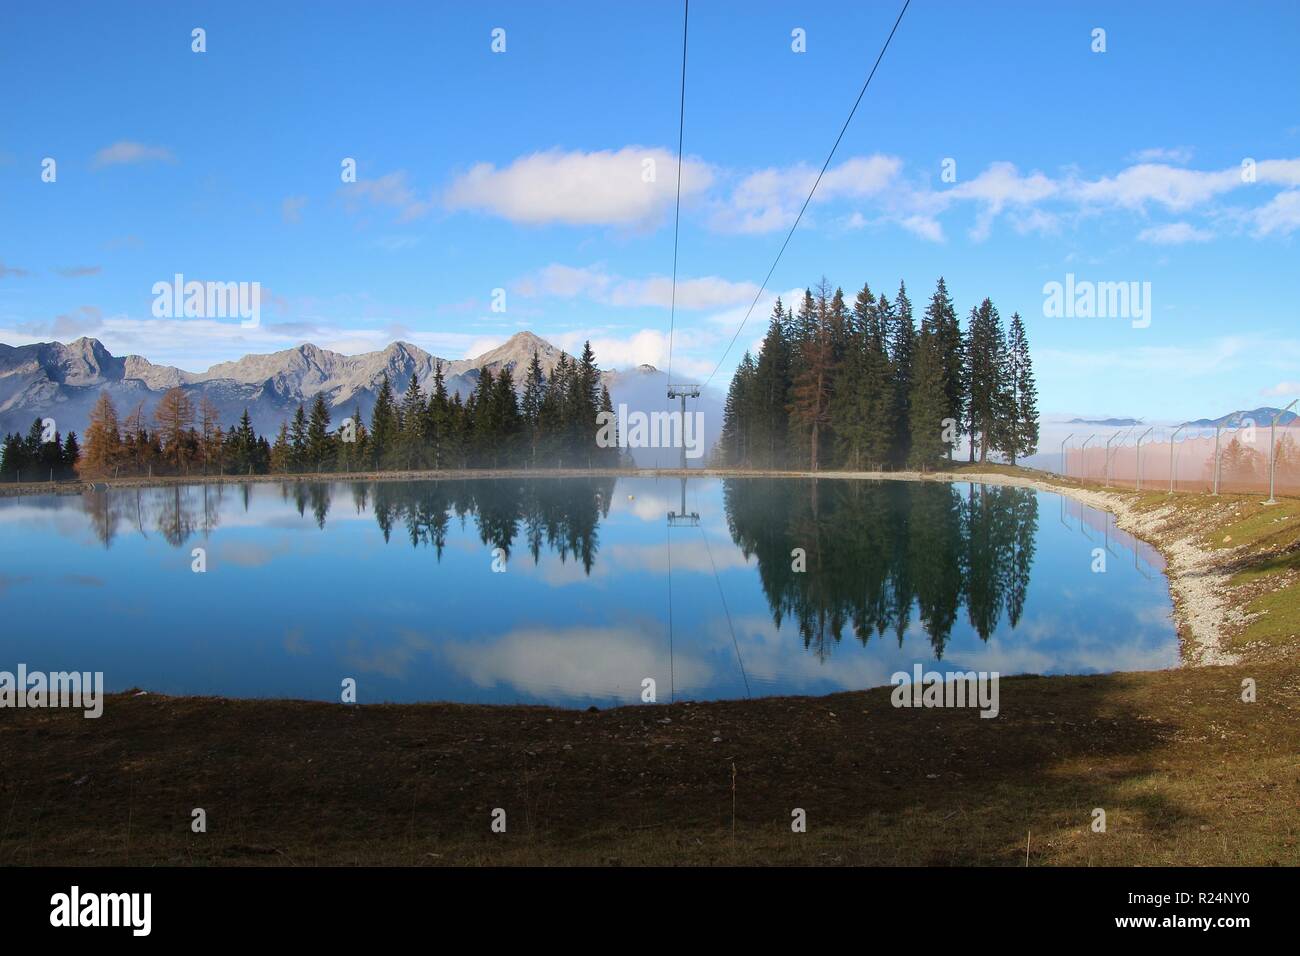 View of a reservoir lake for artificial snow, ski lift and surrounding mountains, in autumn. Height 1300 m. Hinterstoder, Upper Austria, Europe. Stock Photo